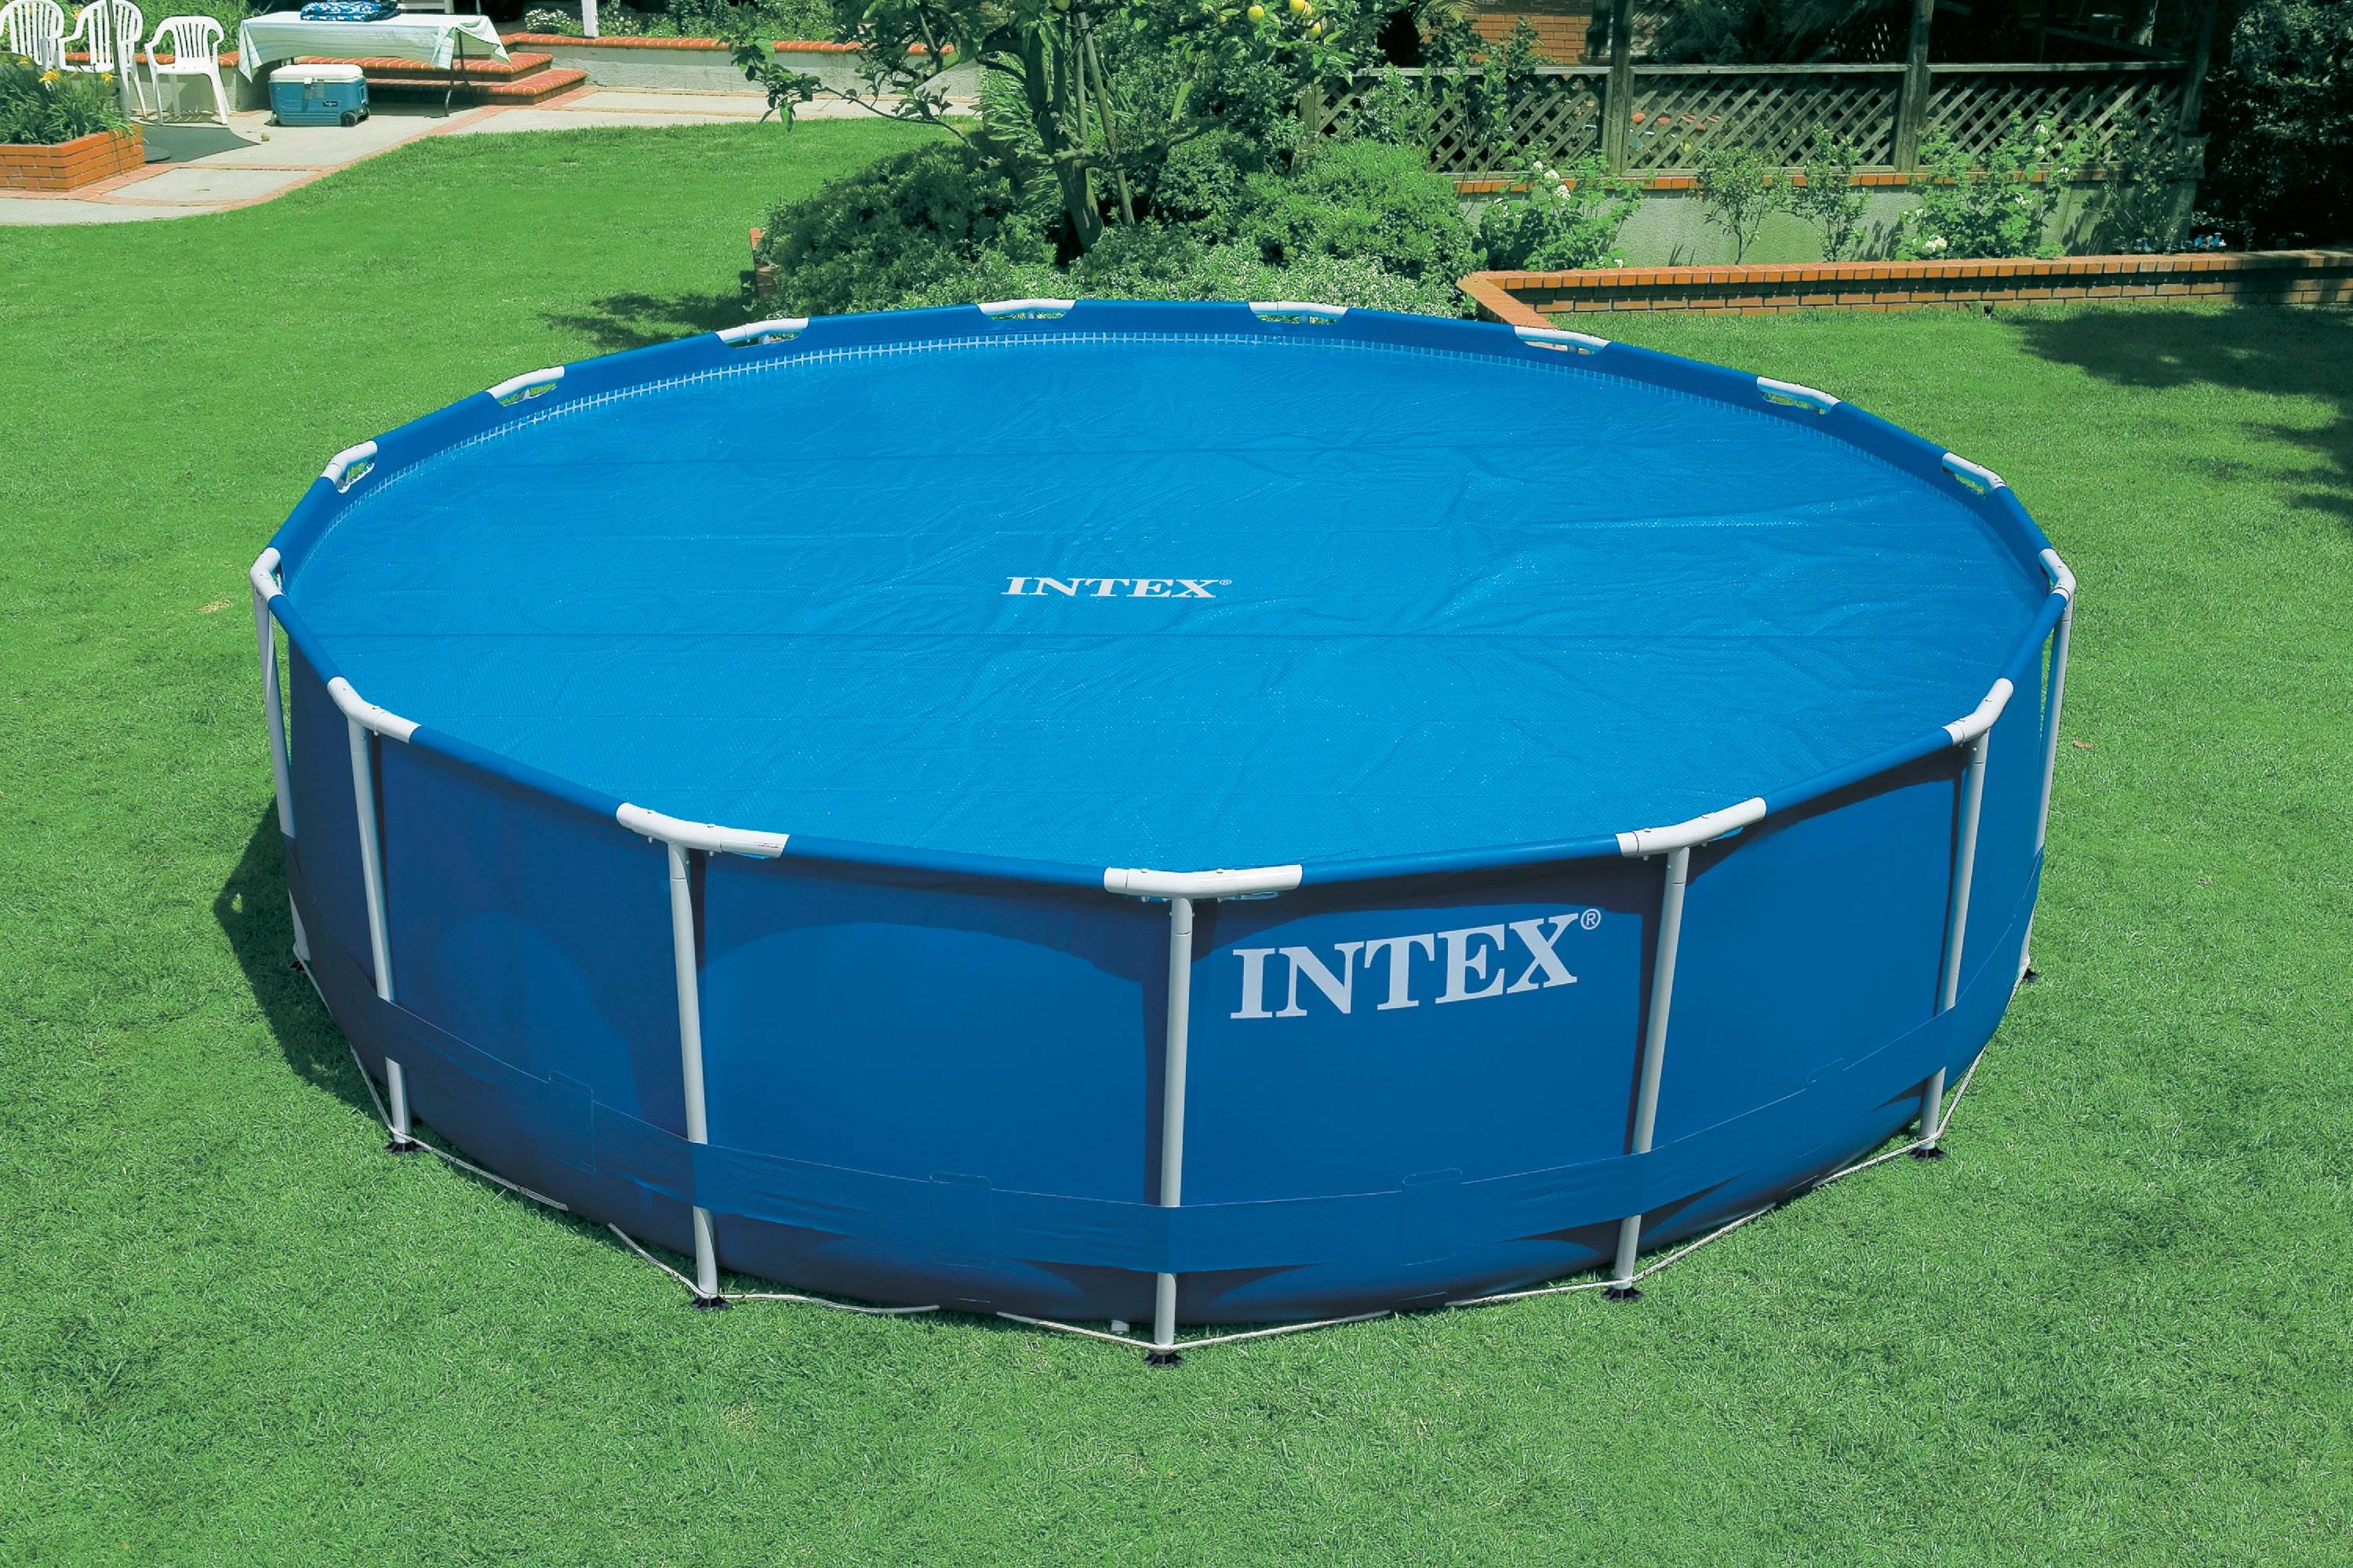 Intex 18 Foot Round Easy Set Blue Solar Cover for Swimming